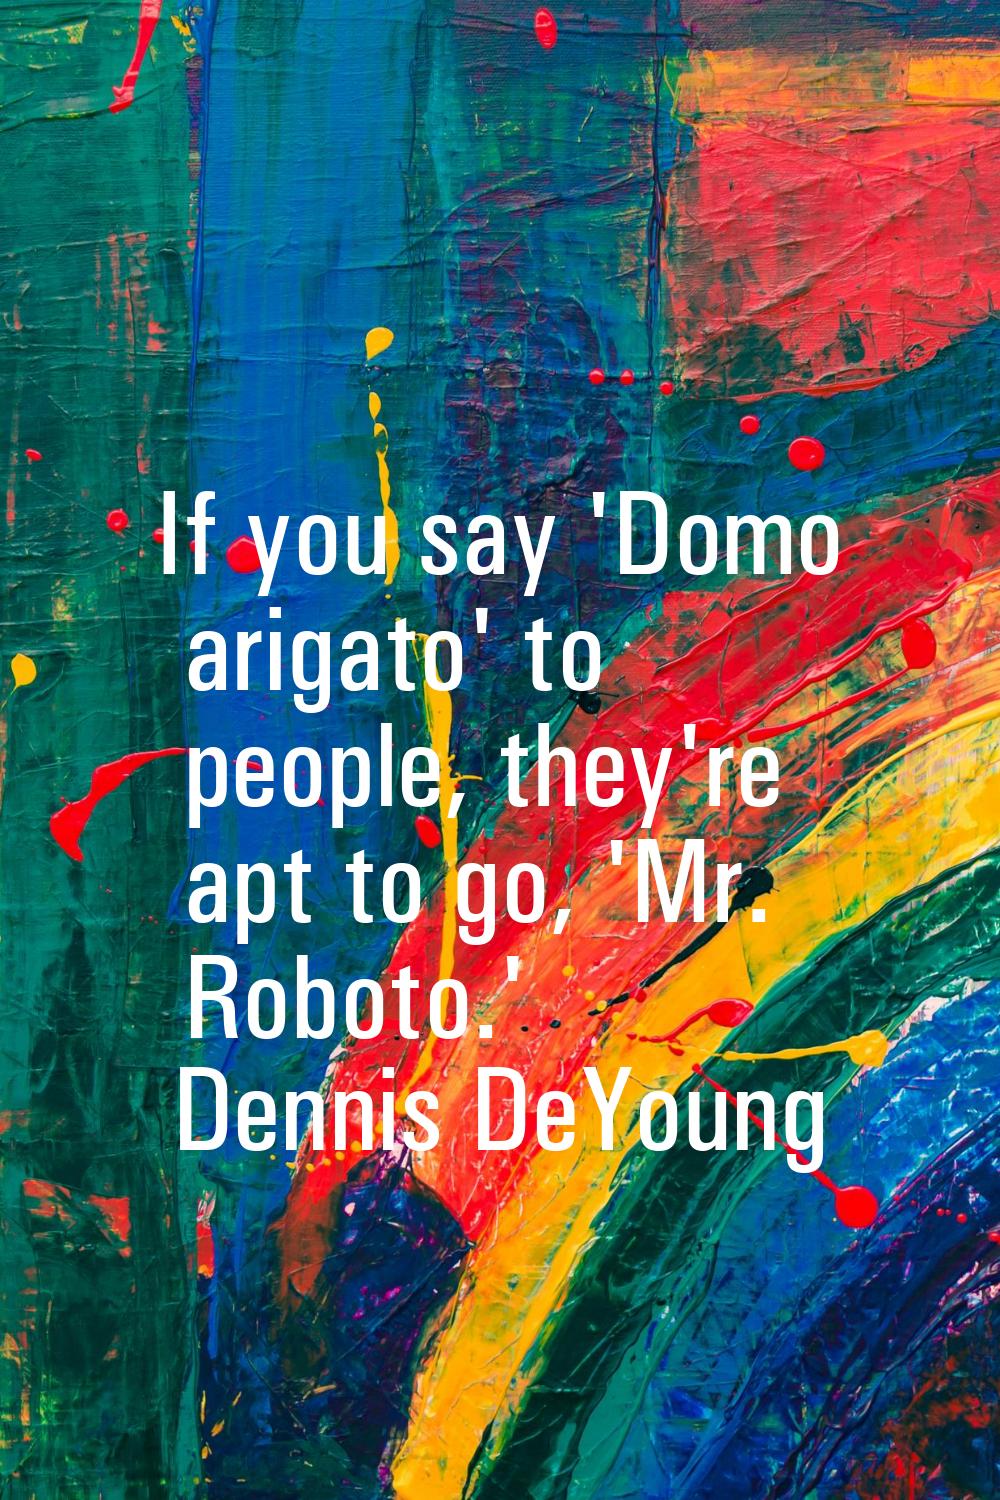 If you say 'Domo arigato' to people, they're apt to go, 'Mr. Roboto.'